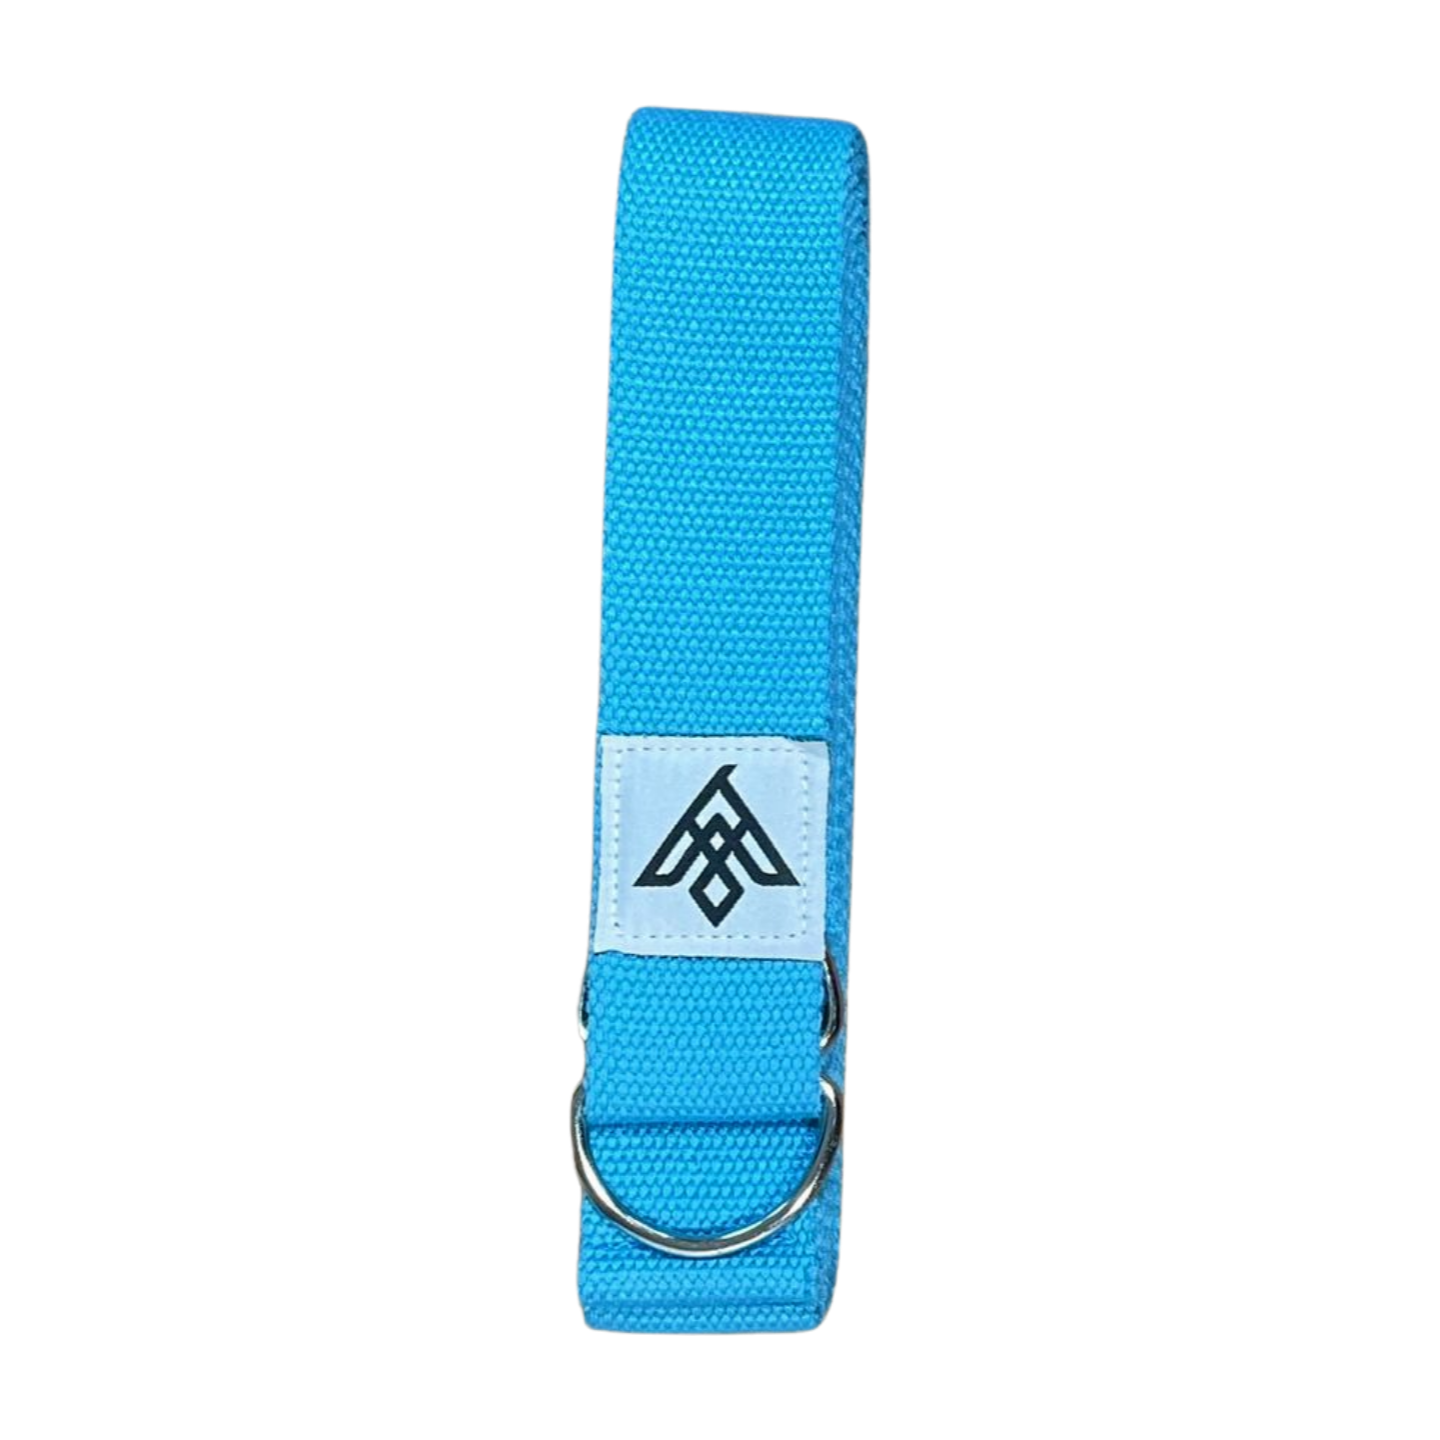 Odyssey Yoga Strap in color Turquoise with Asivana Yoga logo